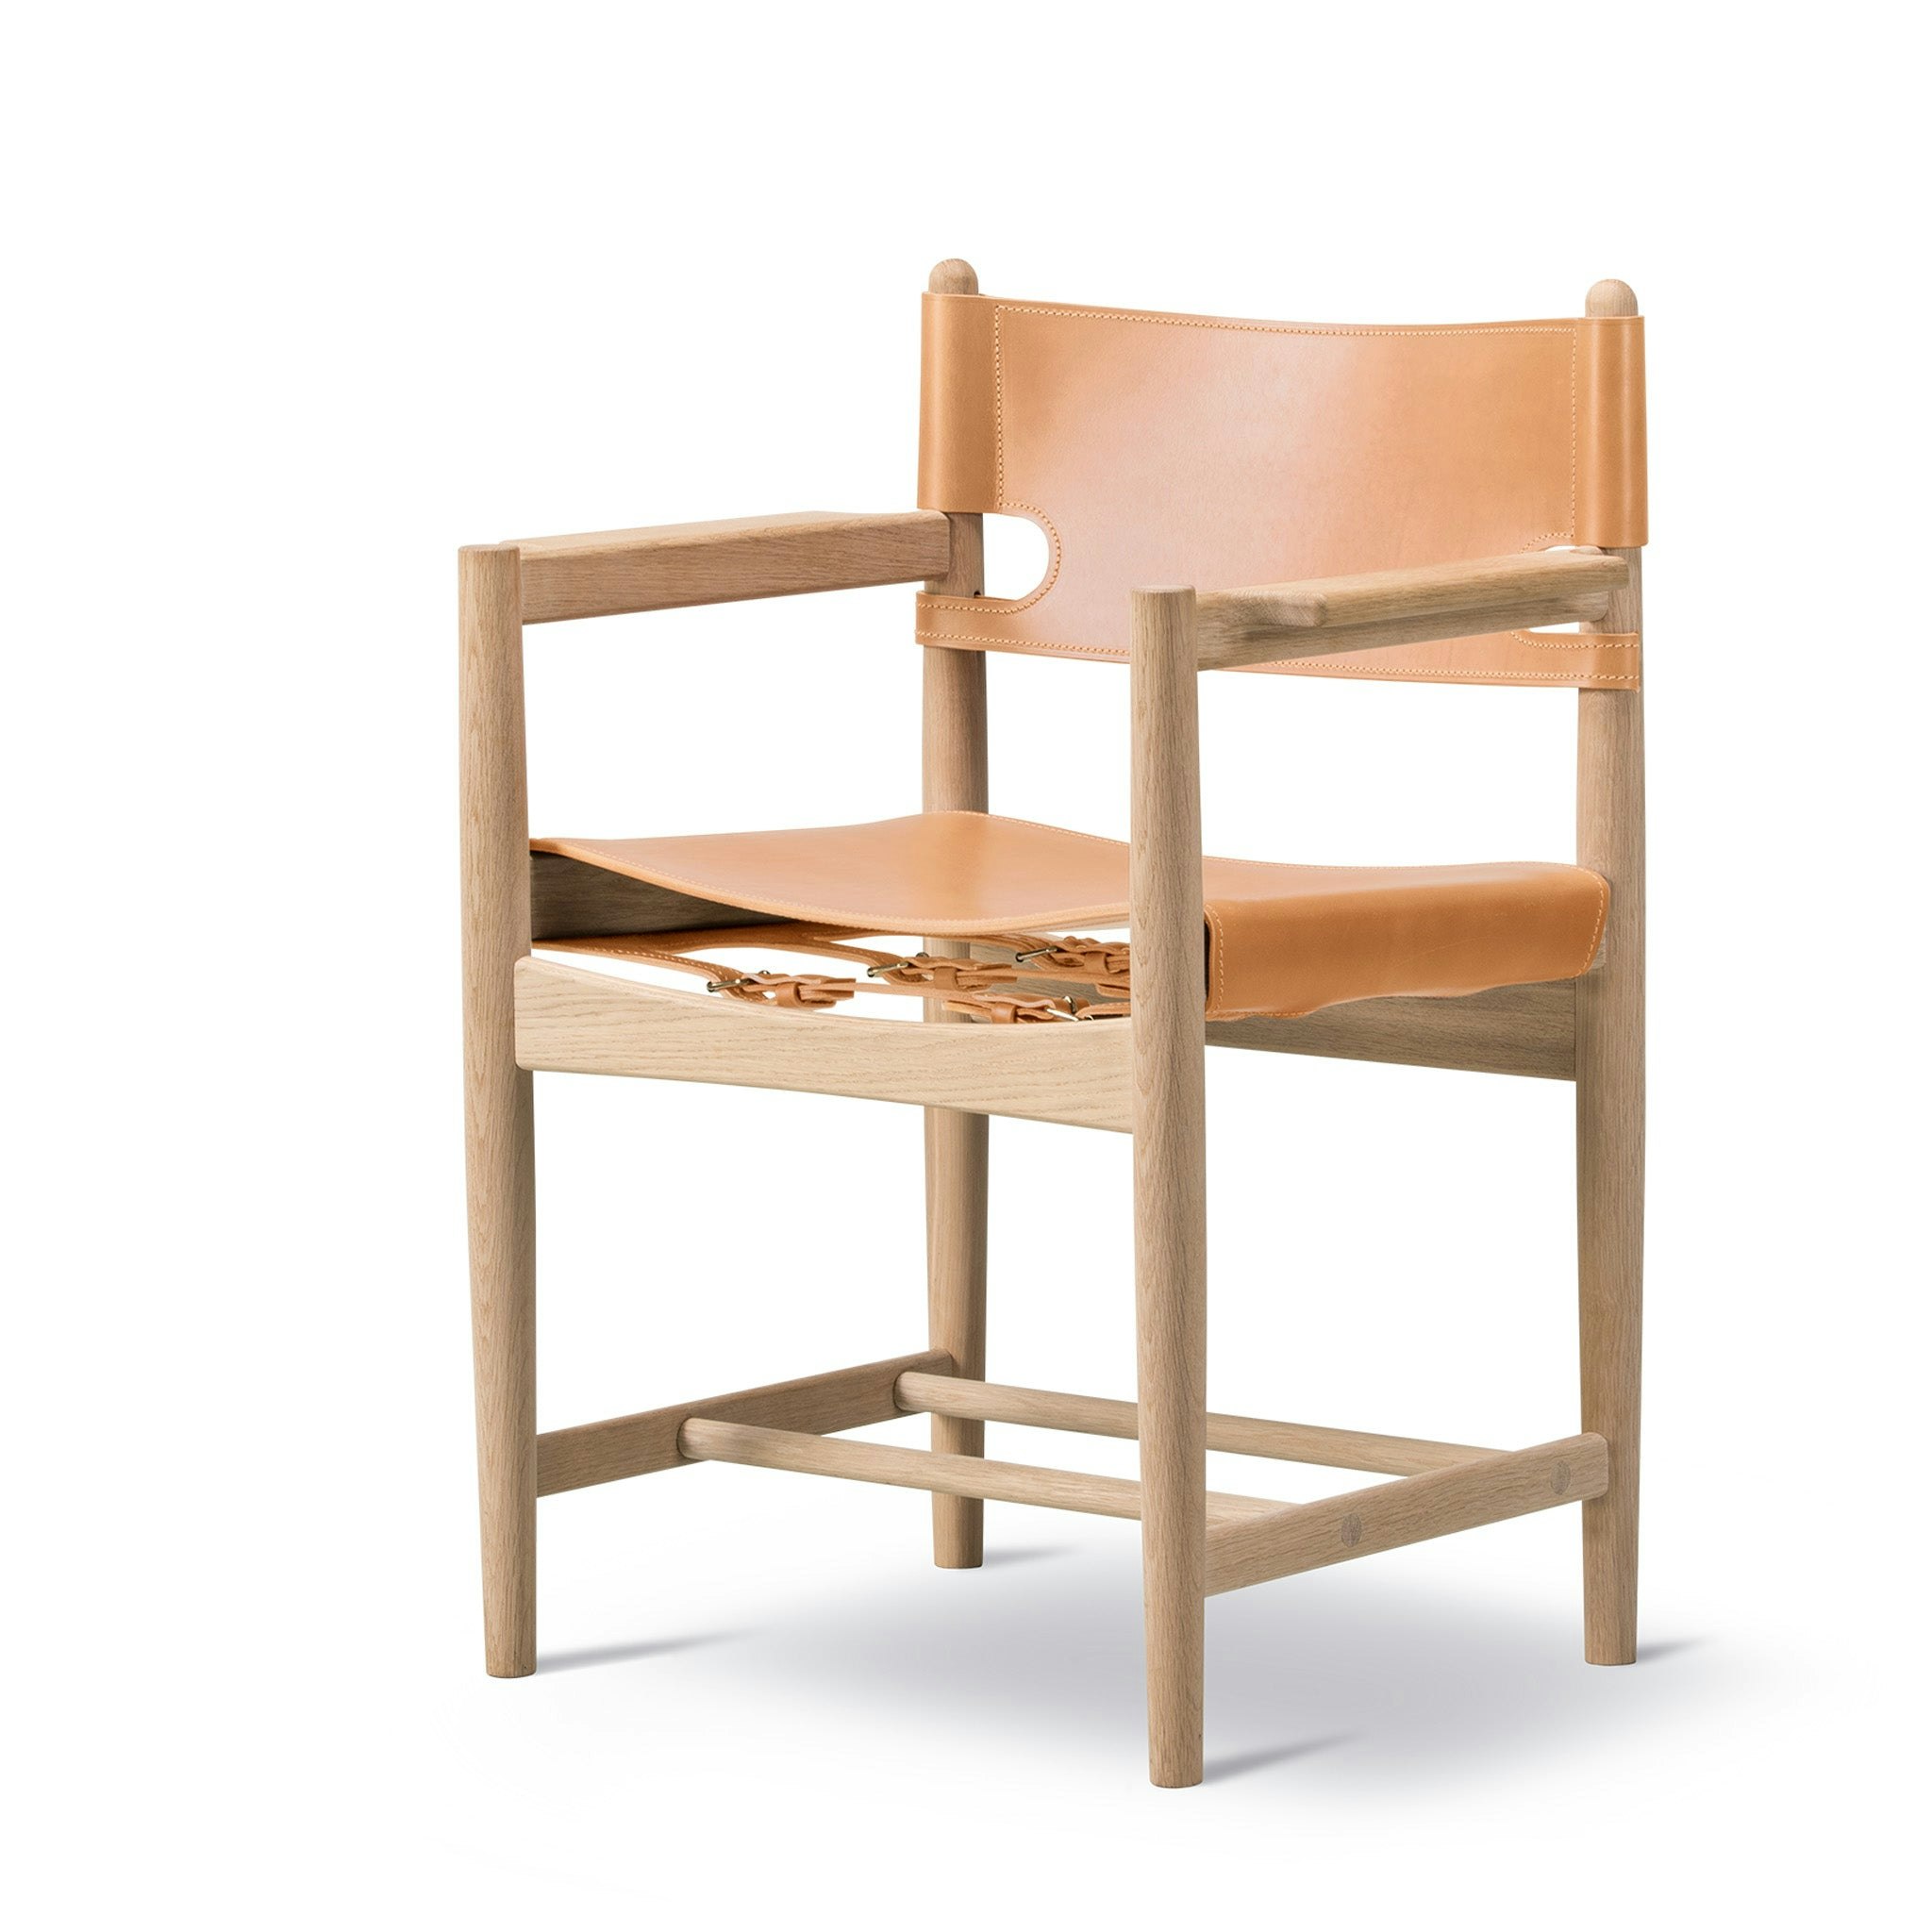 Spanish Dining Chair With Arms by Fredericia